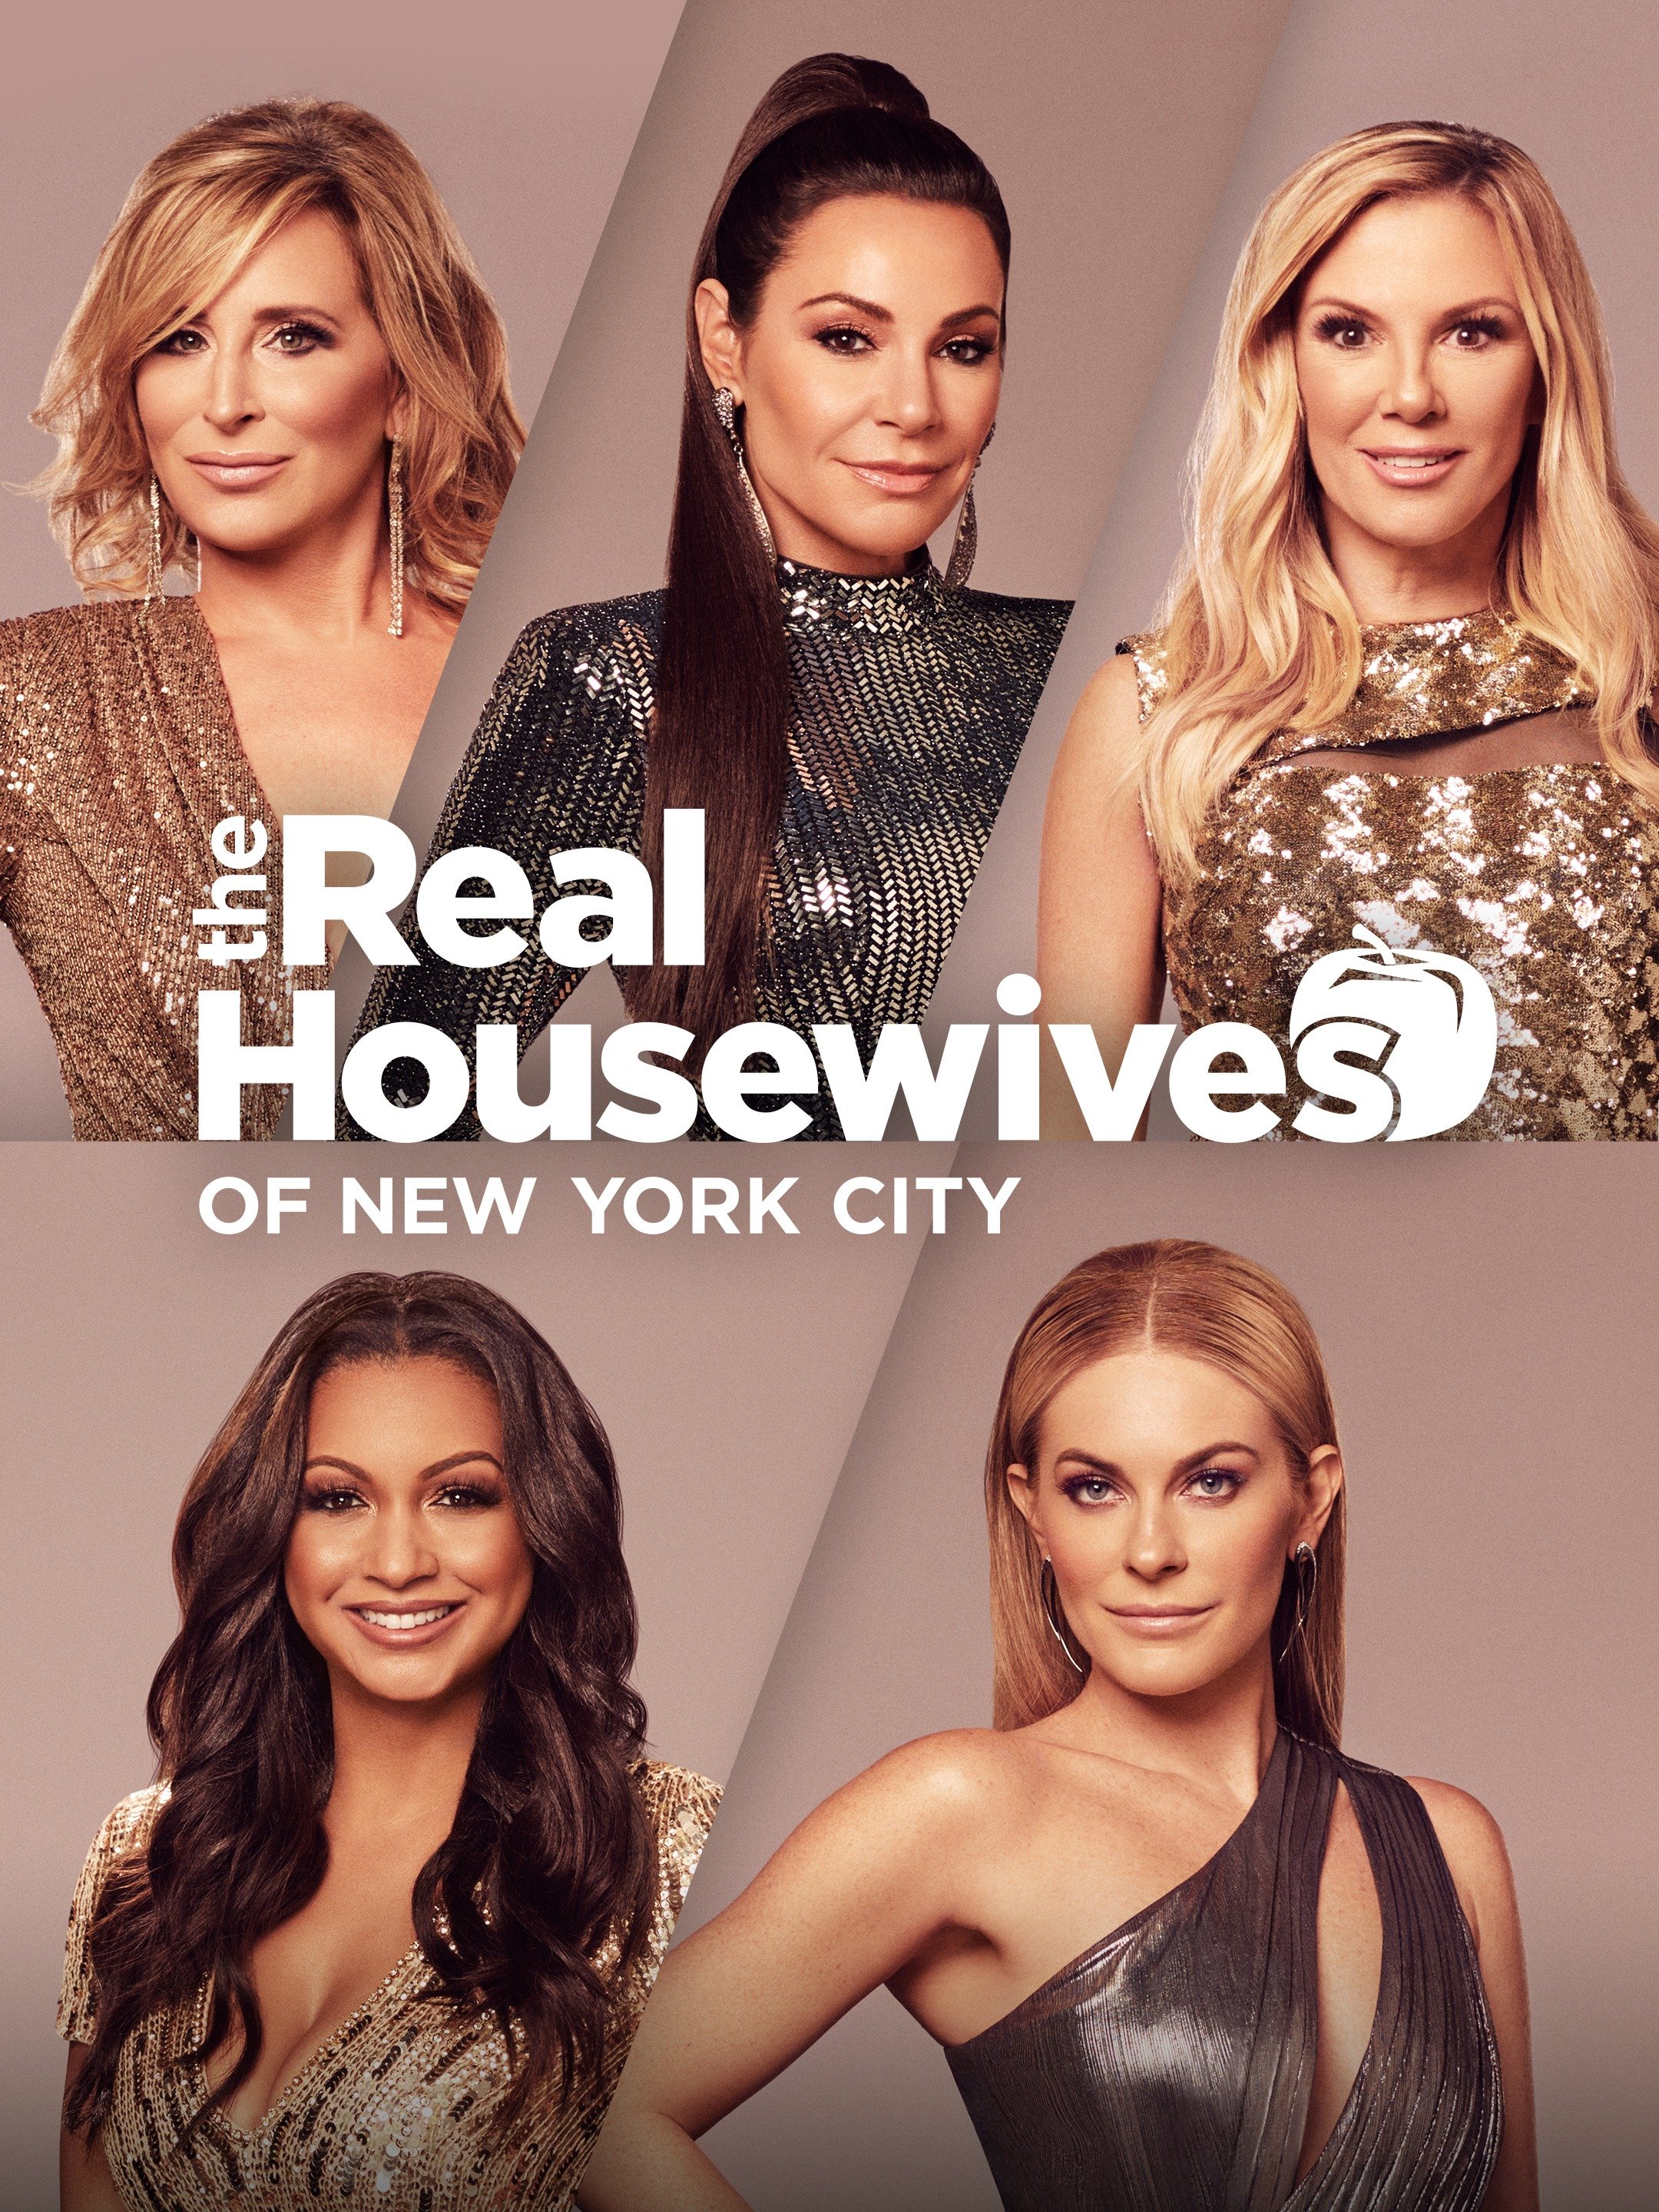 The Real Housewives of New York City image